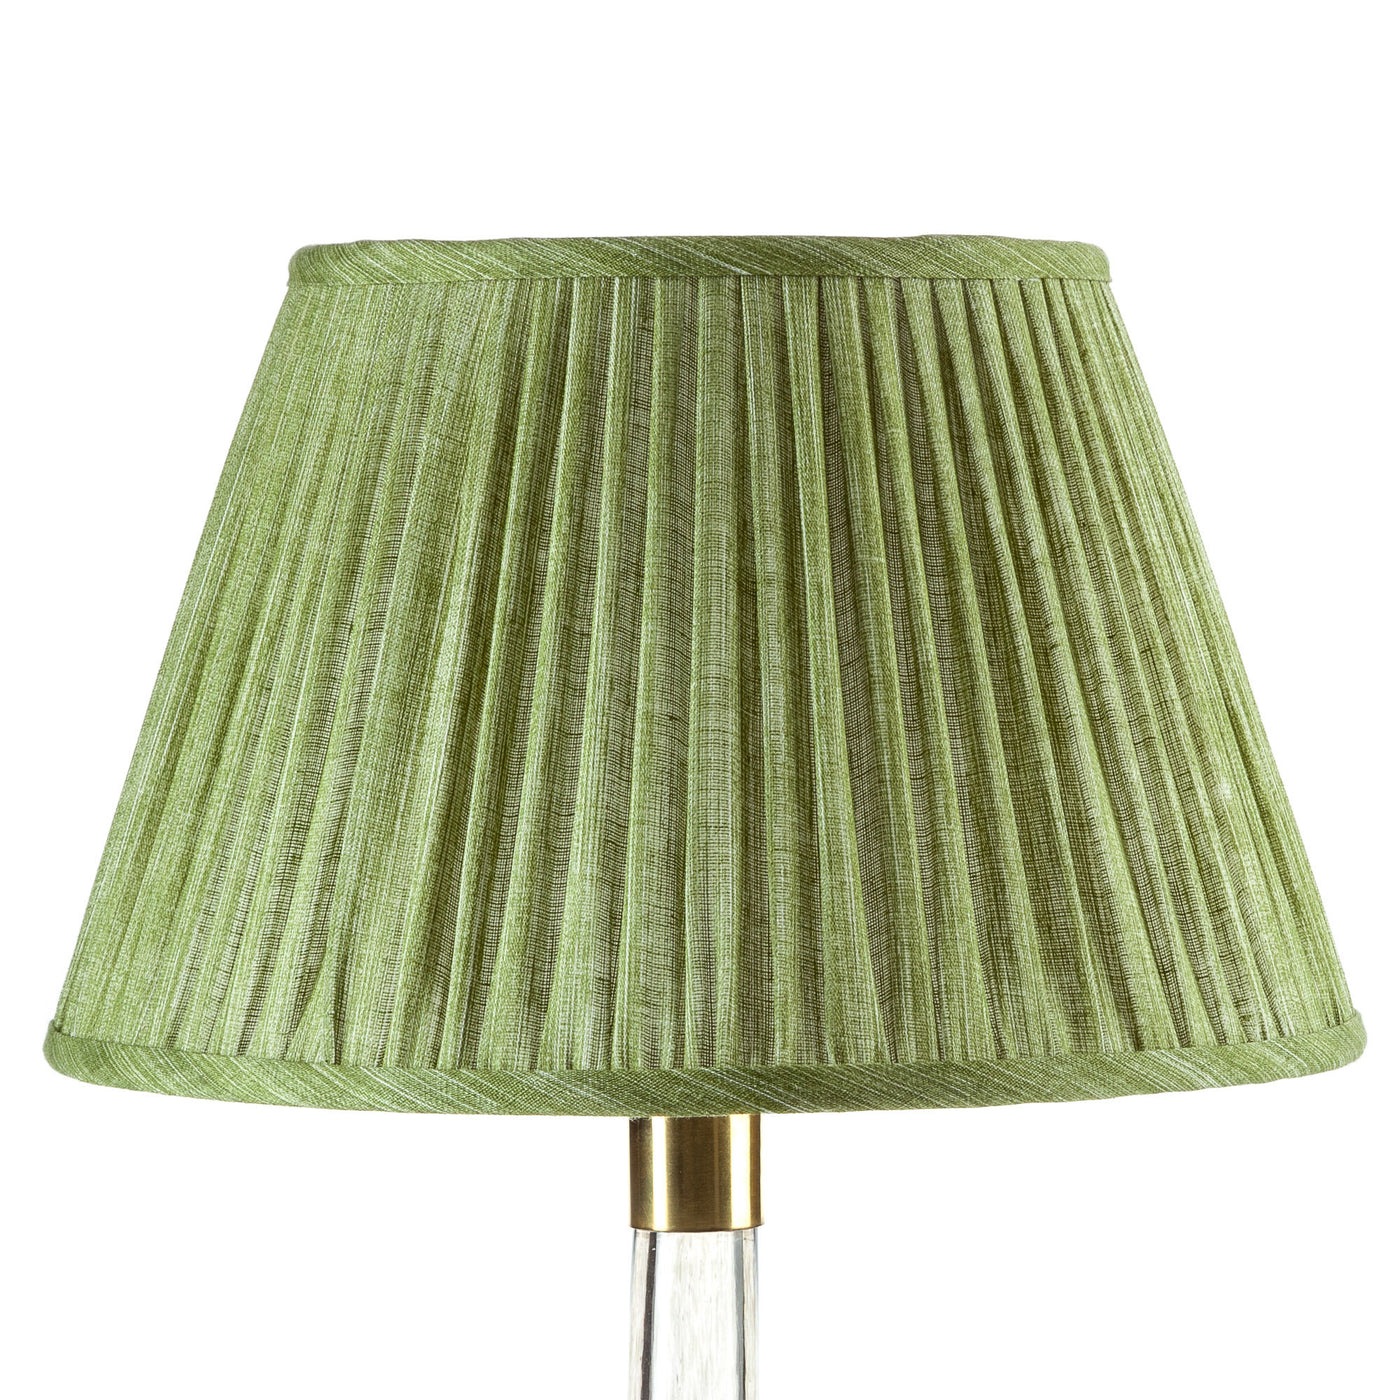 16" Fermoie Lampshade - Plain Linen in Kintyre Green  | Newport Lamp And Shade | Located in Newport, RI